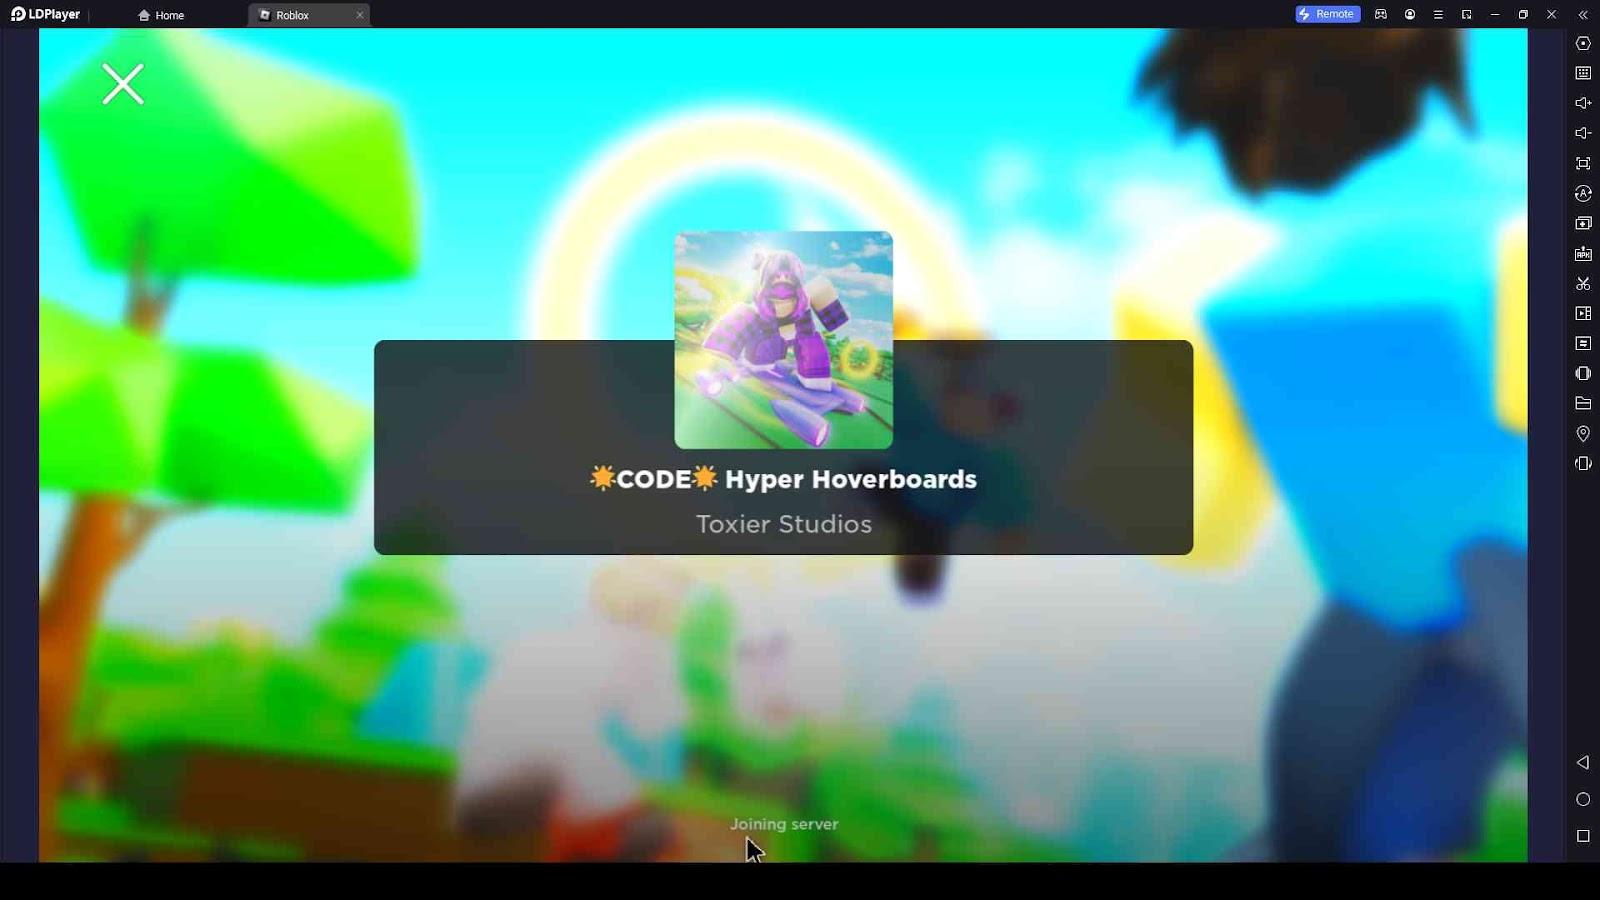 Roblox Hyper Hoverboards Codes: Race and Explore - 2023 December-Redeem Code -LDPlayer